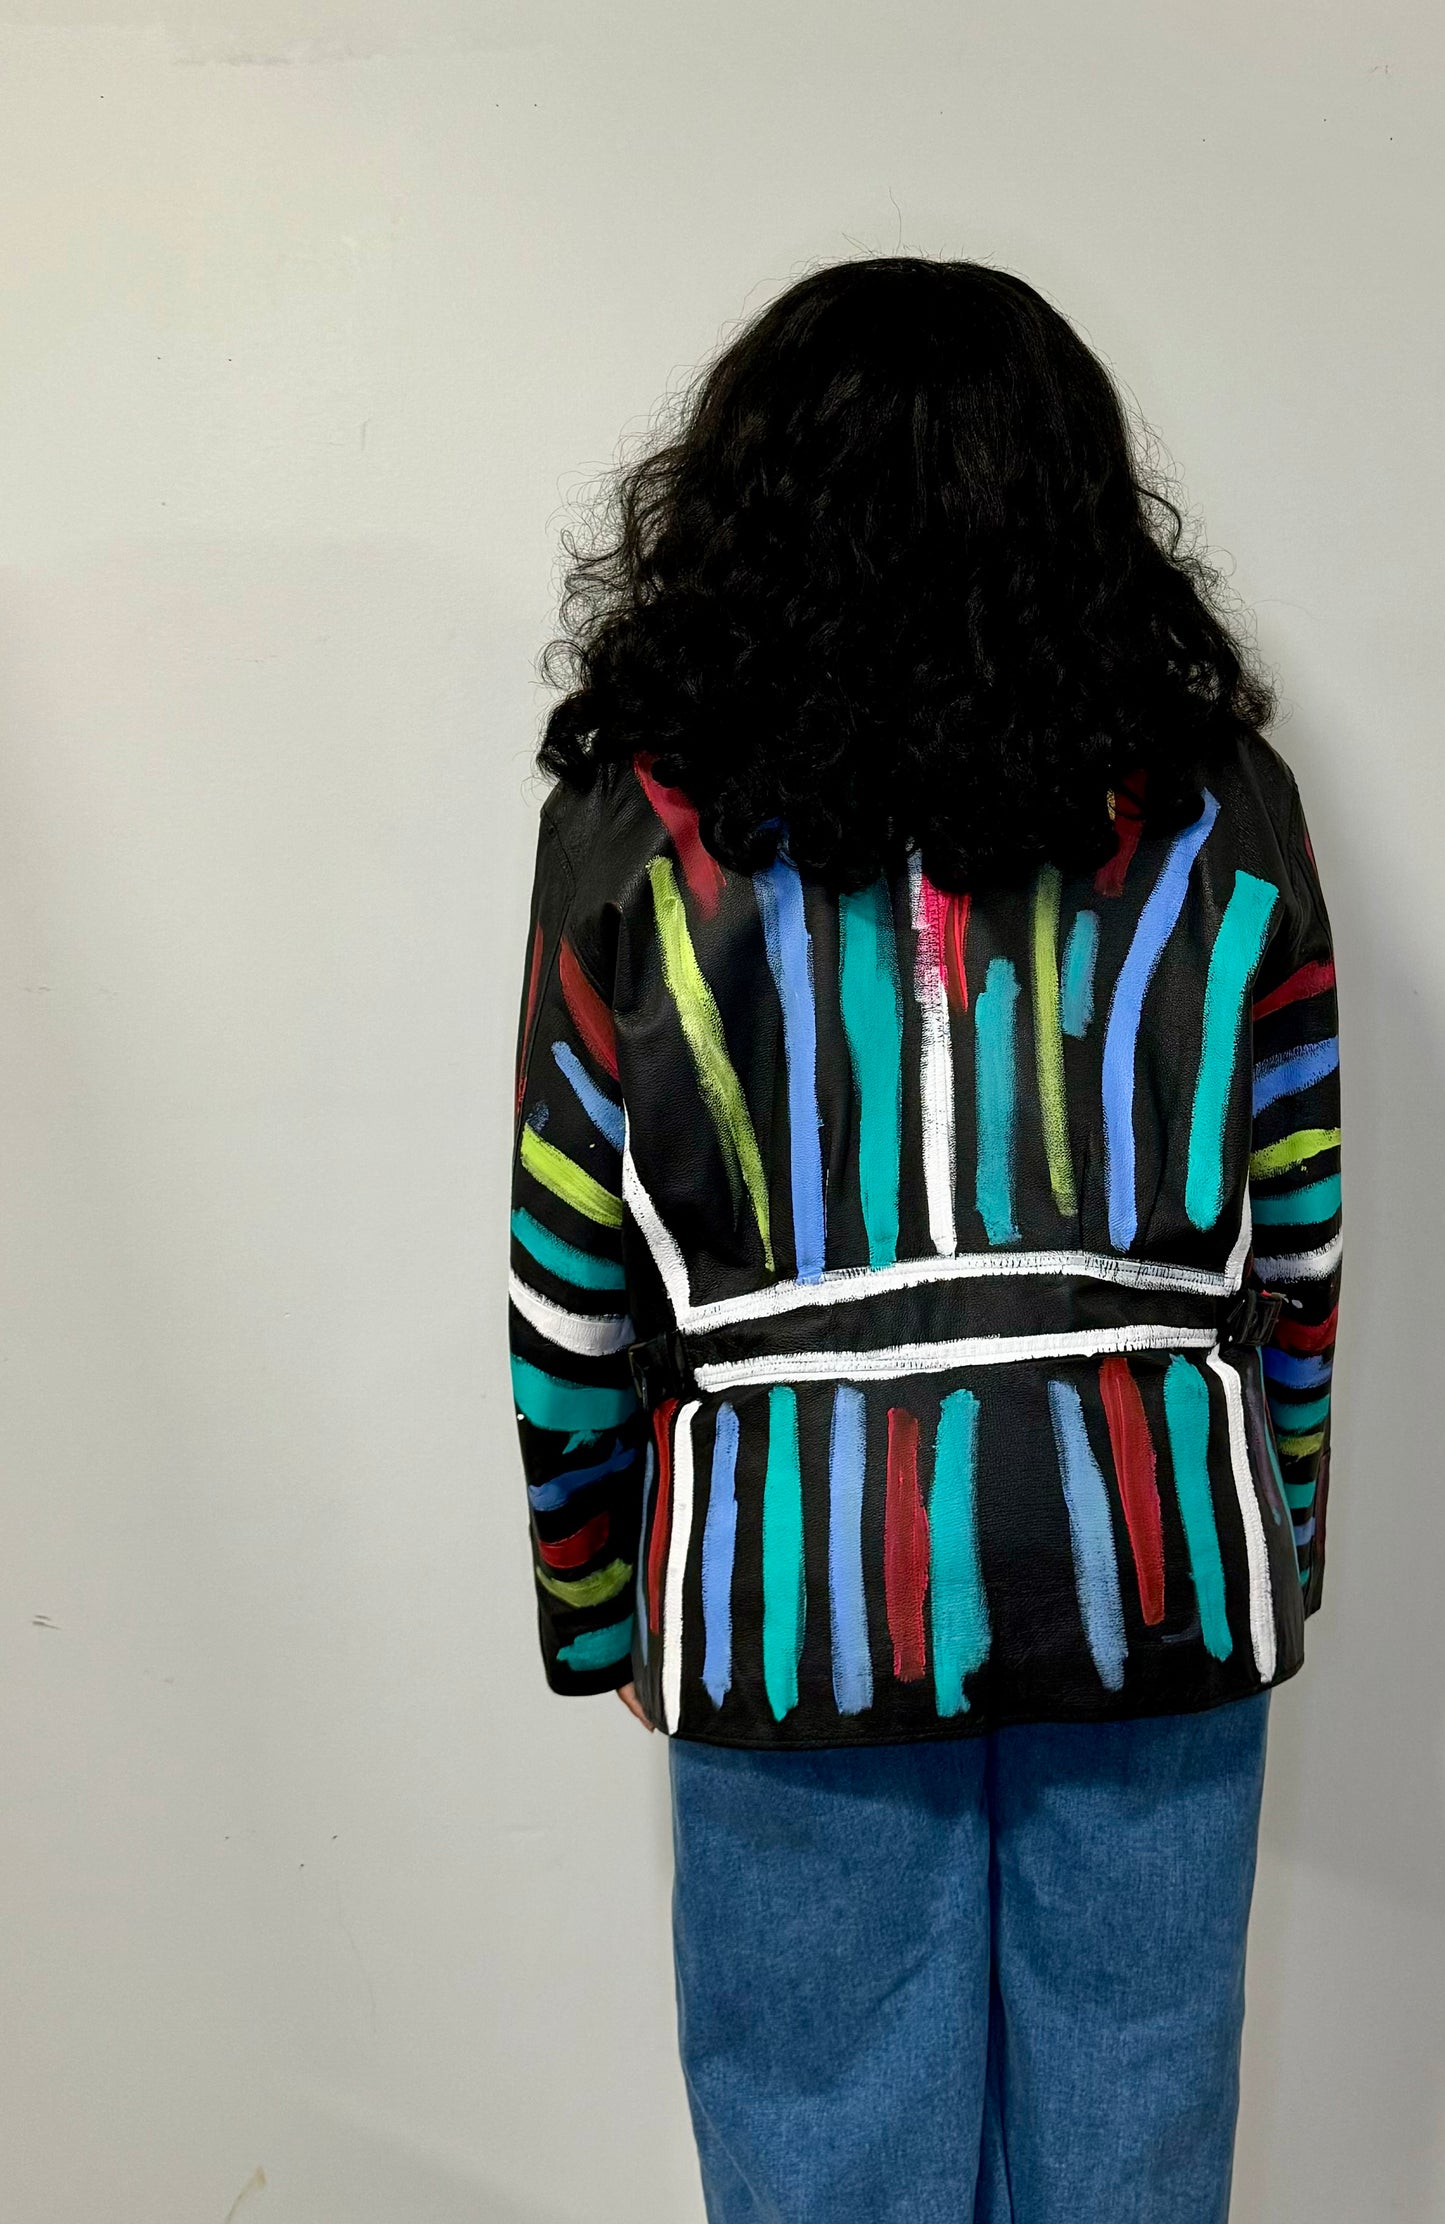 Eclectic Jazz 1:1 handpainted genuine leather jacket